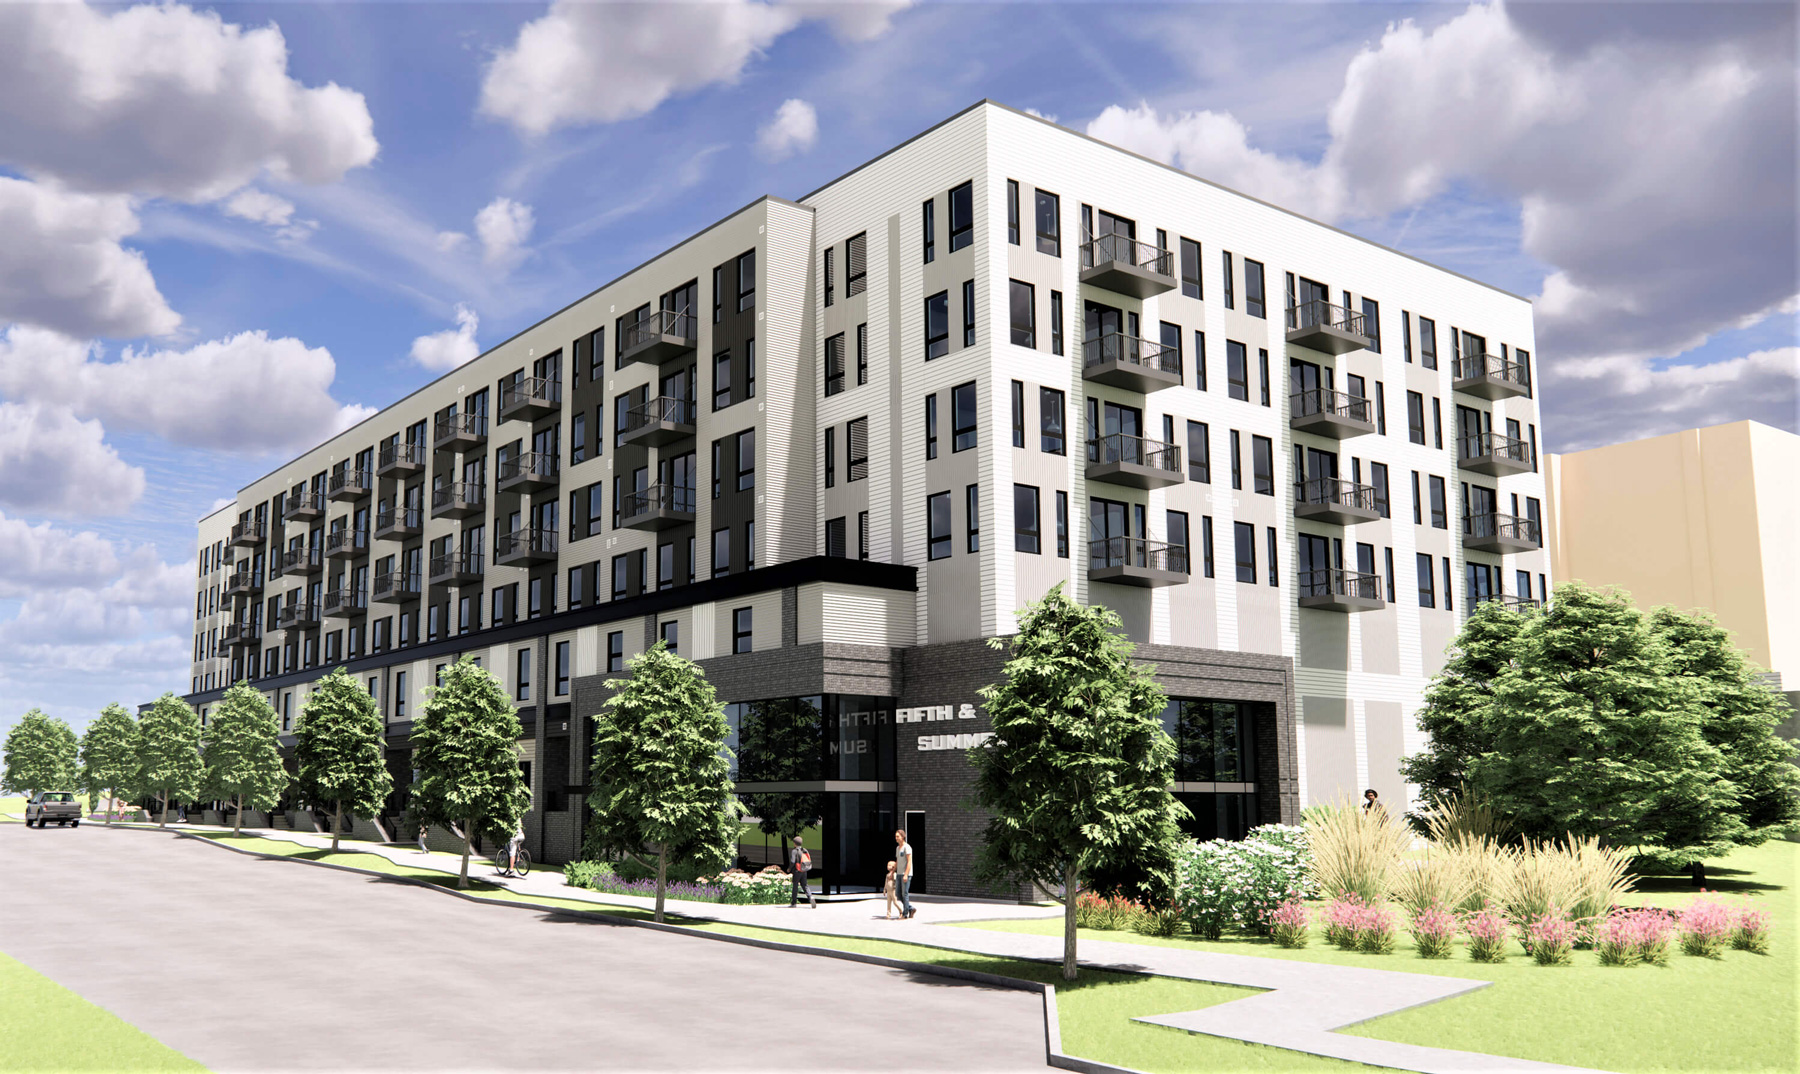 Exterior rendering of 5th and Summer